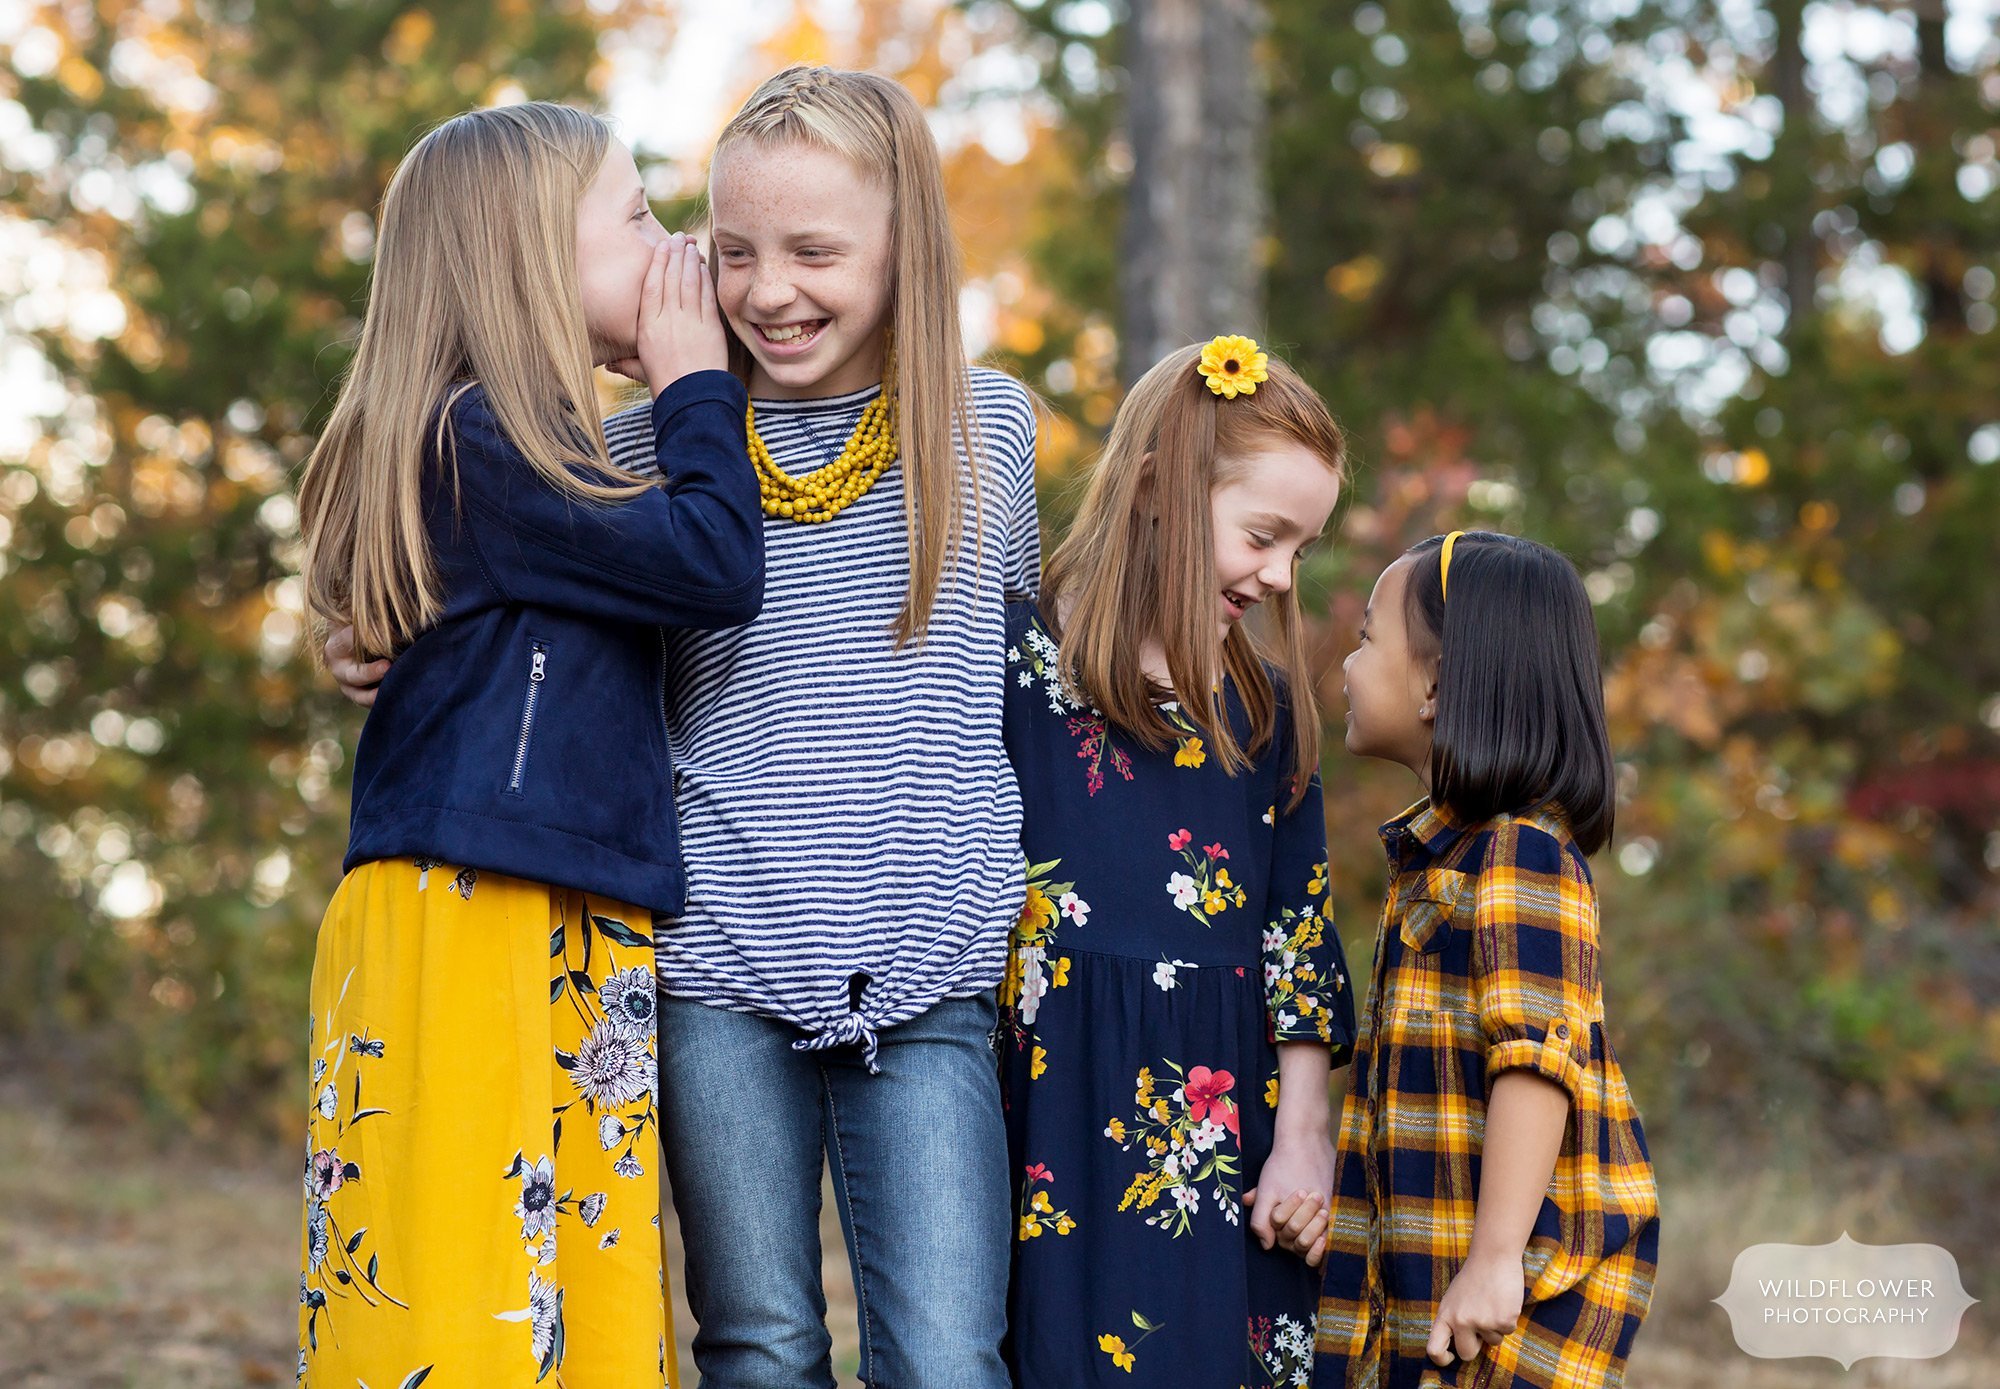 Girls tell secrets during this natural family photography session in Columbia.